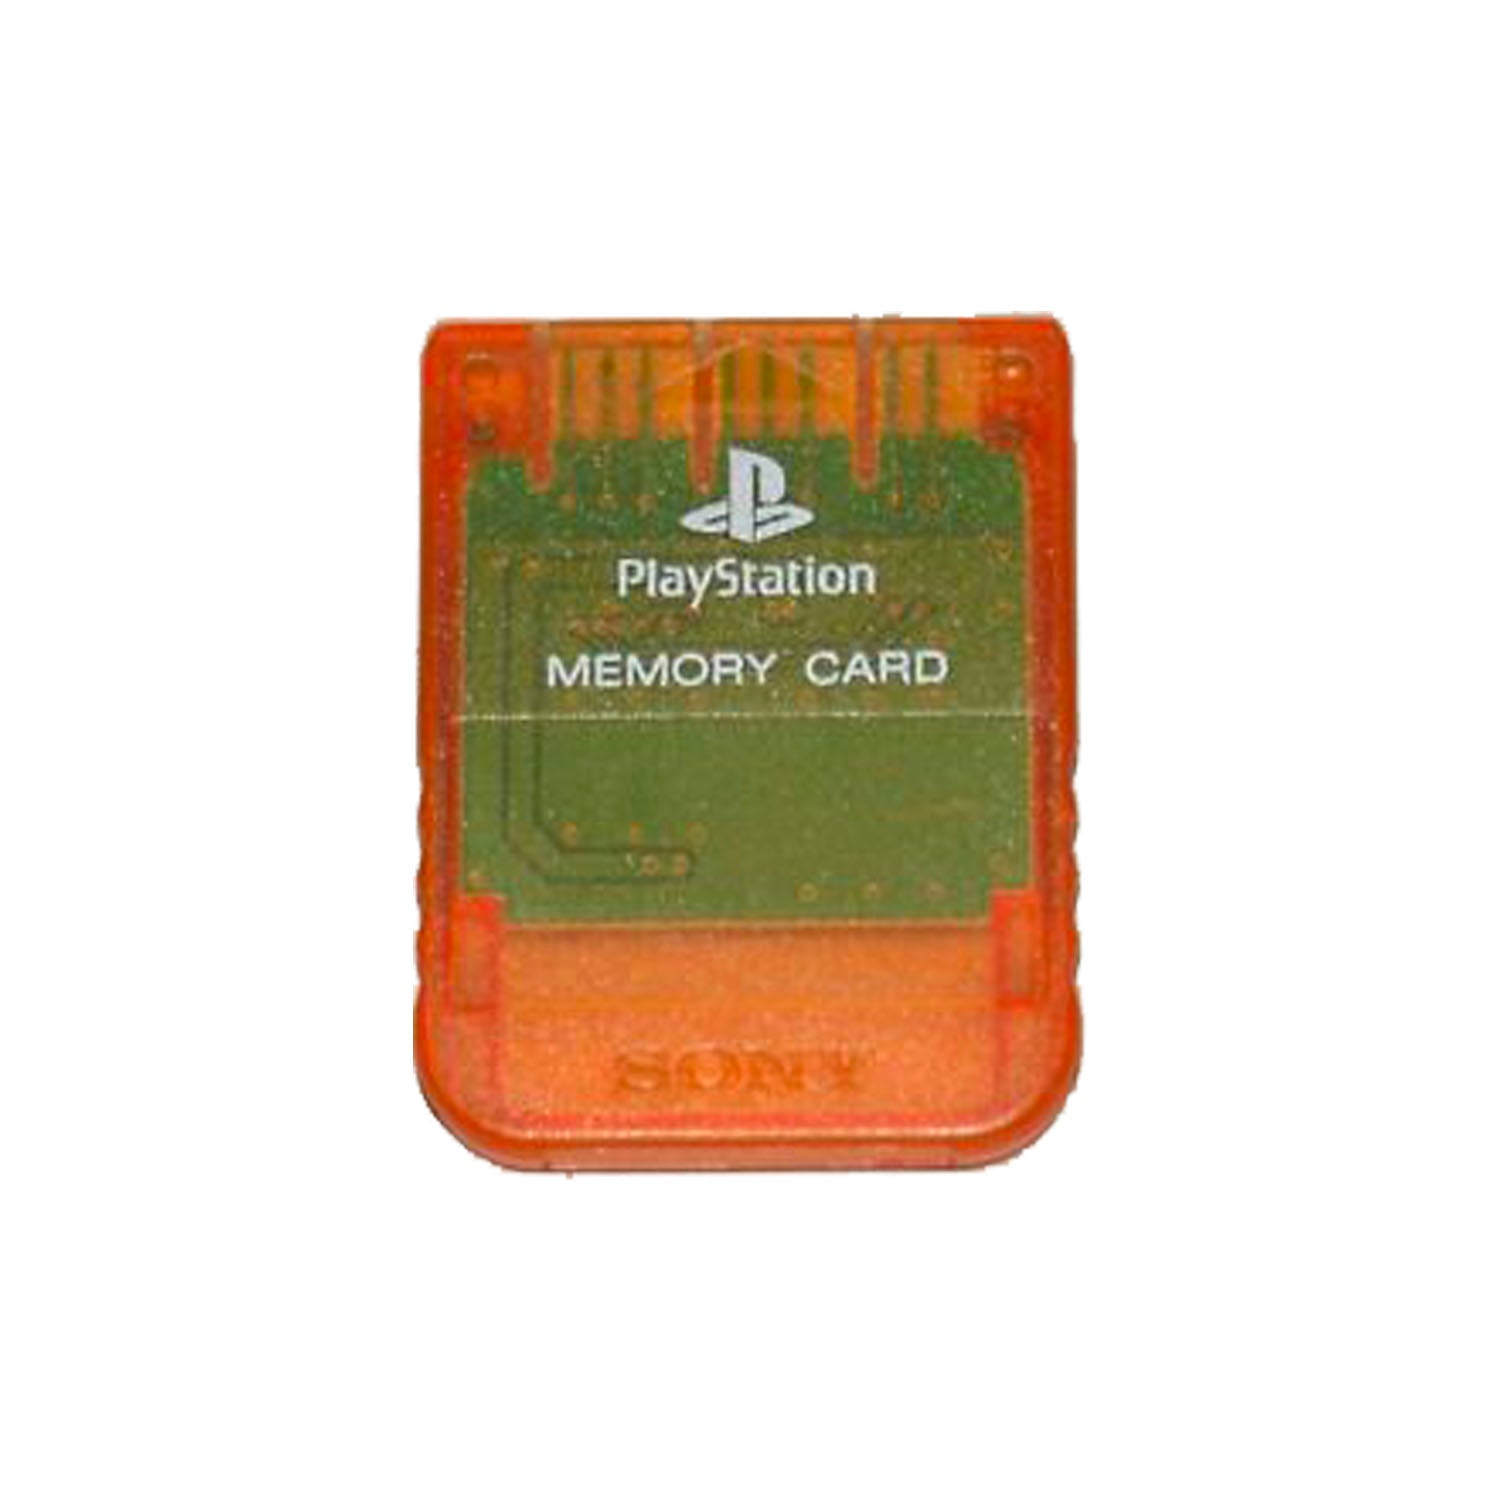 Official 1MB Memory Cards Sony PS1 Playstation - Various - Make Your Choice!!